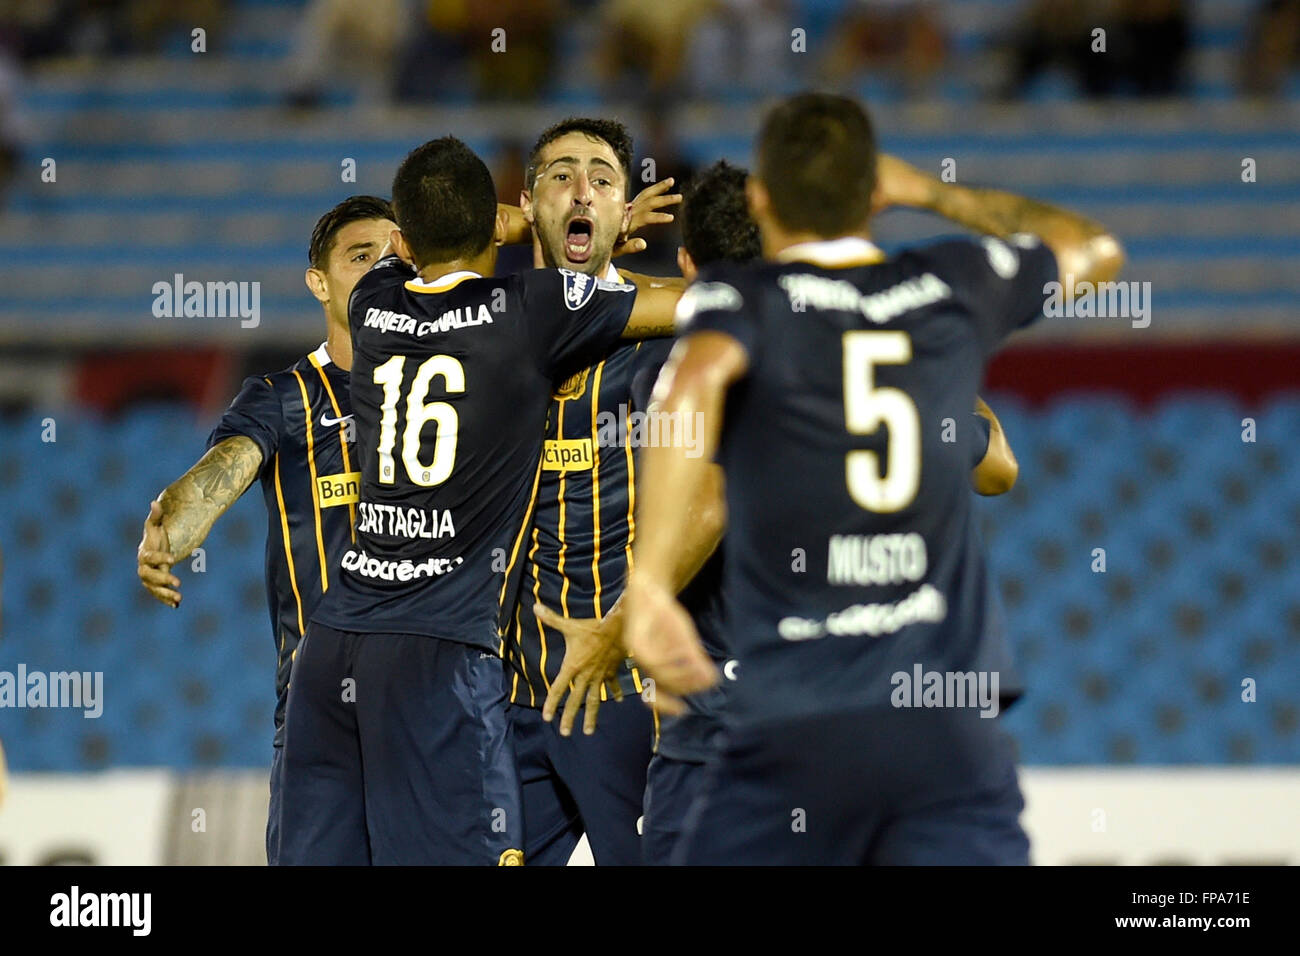 Montevideo, Uruguay. 17th Mar, 2106. Players of Argentina's Rosario Central celebrate a score during the Group 2 match of the Libertadores Cup, against Uruguay's River Plate, held at Centenario Stadium in Montevideo, capital of Uruguay, on March 17, 2106. Rosario Central won by 3-1. © Nicolas Celaya/Xinhua/Alamy Live News Stock Photo